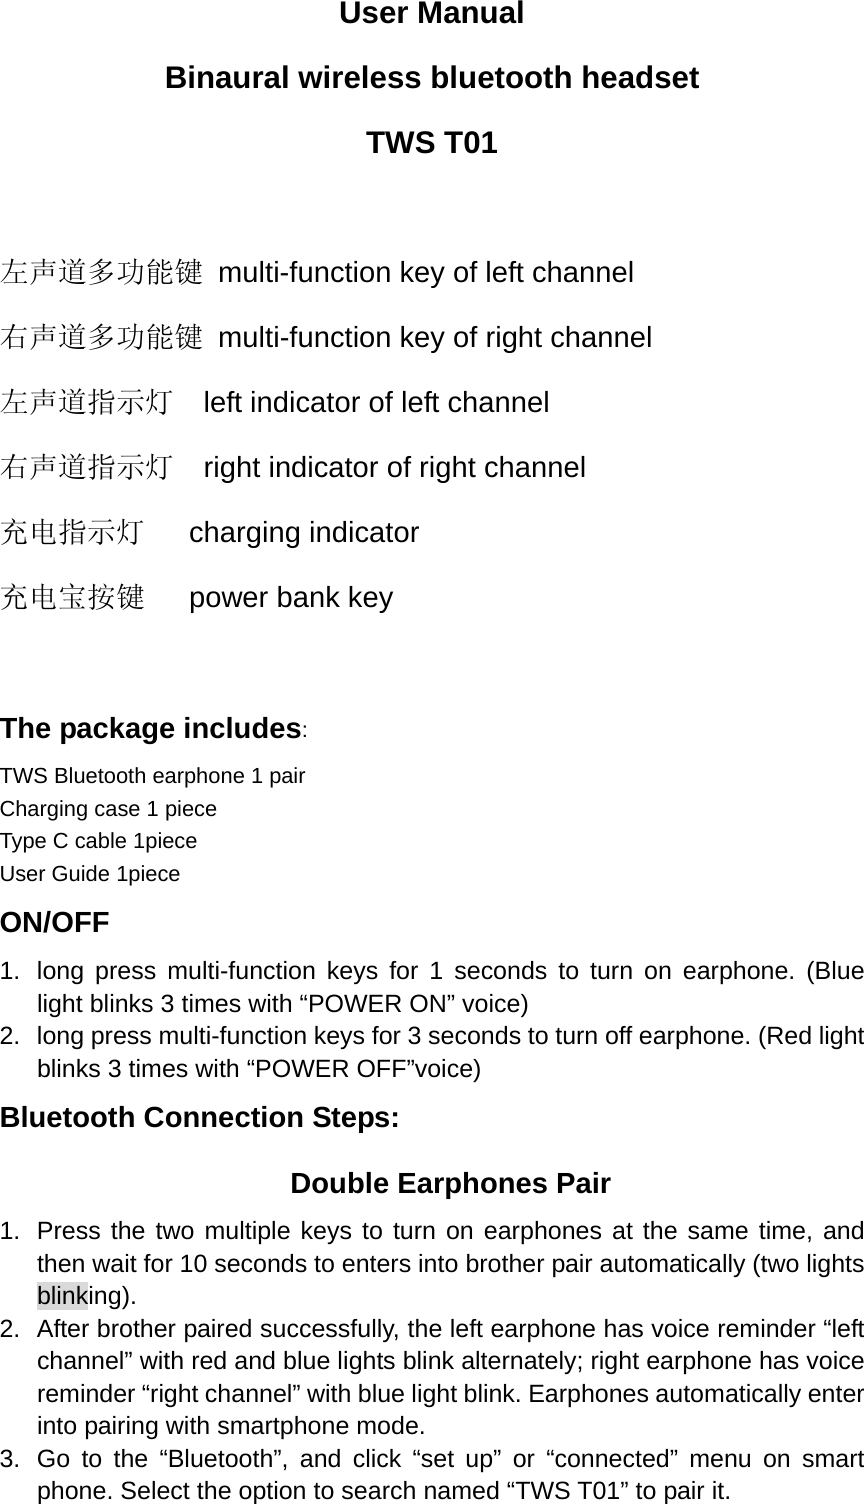 User Manual Binaural wireless bluetooth headset TWS T01  左声道多功能键  multi-function key of left channel 右声道多功能键  multi-function key of right channel 左声道指示灯    left indicator of left channel 右声道指示灯    right indicator of right channel 充电指示灯   charging indicator 充电宝按键   power bank key  The package includes: TWS Bluetooth earphone 1 pair        Charging case 1 piece Type C cable 1piece   User Guide 1piece ON/OFF 1.  long press multi-function keys for 1 seconds to turn on earphone. (Blue light blinks 3 times with “POWER ON” voice) 2.  long press multi-function keys for 3 seconds to turn off earphone. (Red light blinks 3 times with “POWER OFF”voice) Bluetooth Connection Steps: Double Earphones Pair 1.  Press the two multiple keys to turn on earphones at the same time, and then wait for 10 seconds to enters into brother pair automatically (two lights blinking). 2.  After brother paired successfully, the left earphone has voice reminder “left channel” with red and blue lights blink alternately; right earphone has voice reminder “right channel” with blue light blink. Earphones automatically enter into pairing with smartphone mode. 3.  Go to the “Bluetooth”, and click “set up” or “connected” menu on smart phone. Select the option to search named “TWS T01” to pair it. 